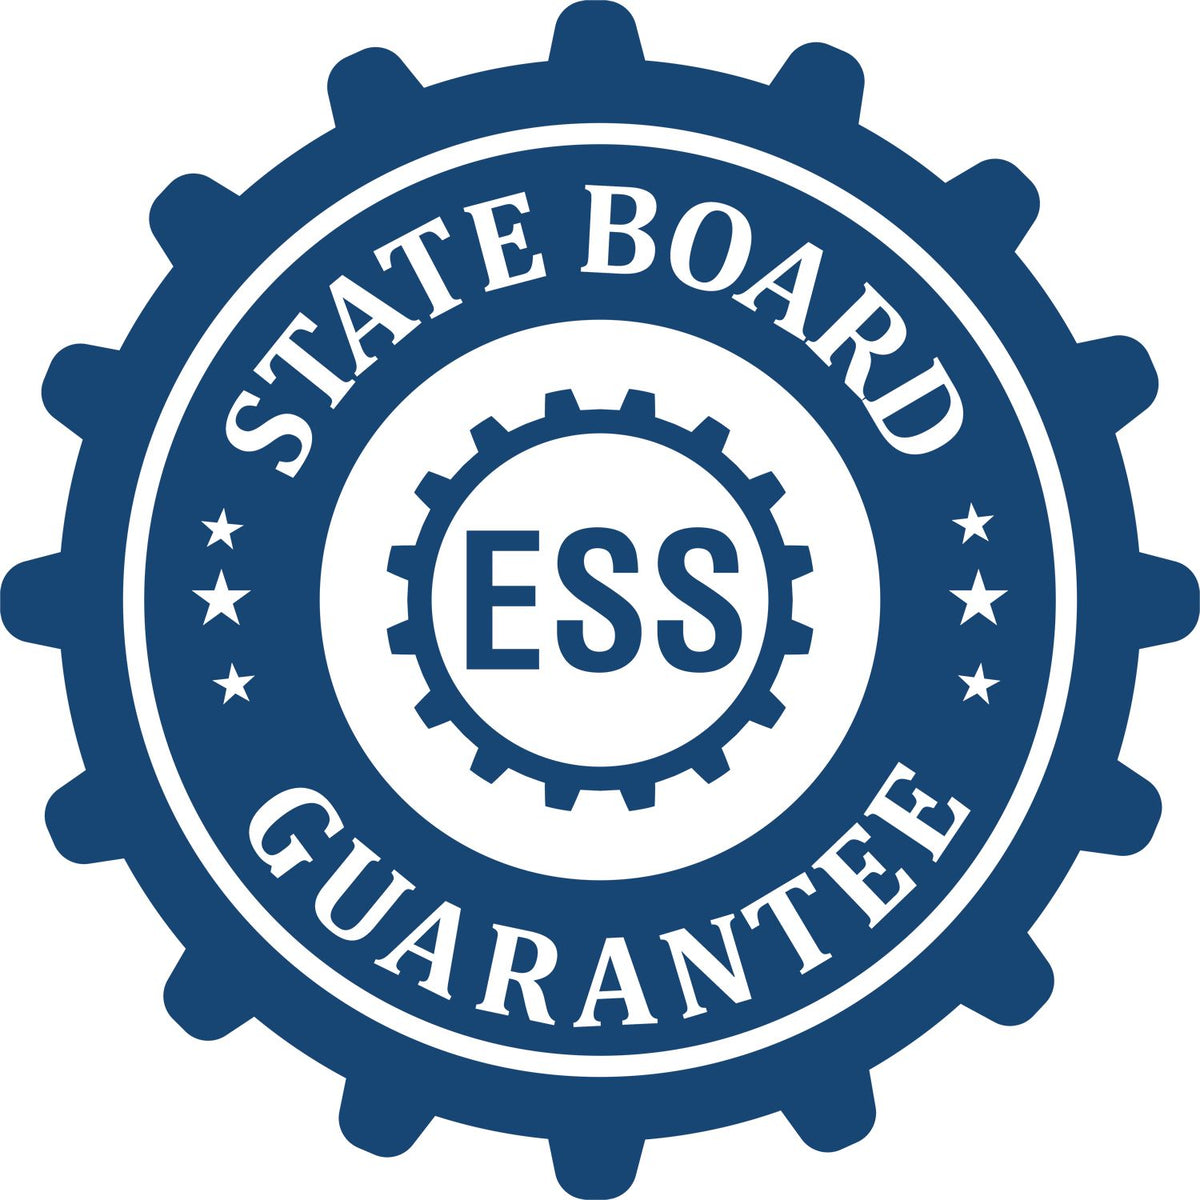 An emblem in a gear shape illustrating a state board guarantee for the Hybrid Idaho Geologist Seal